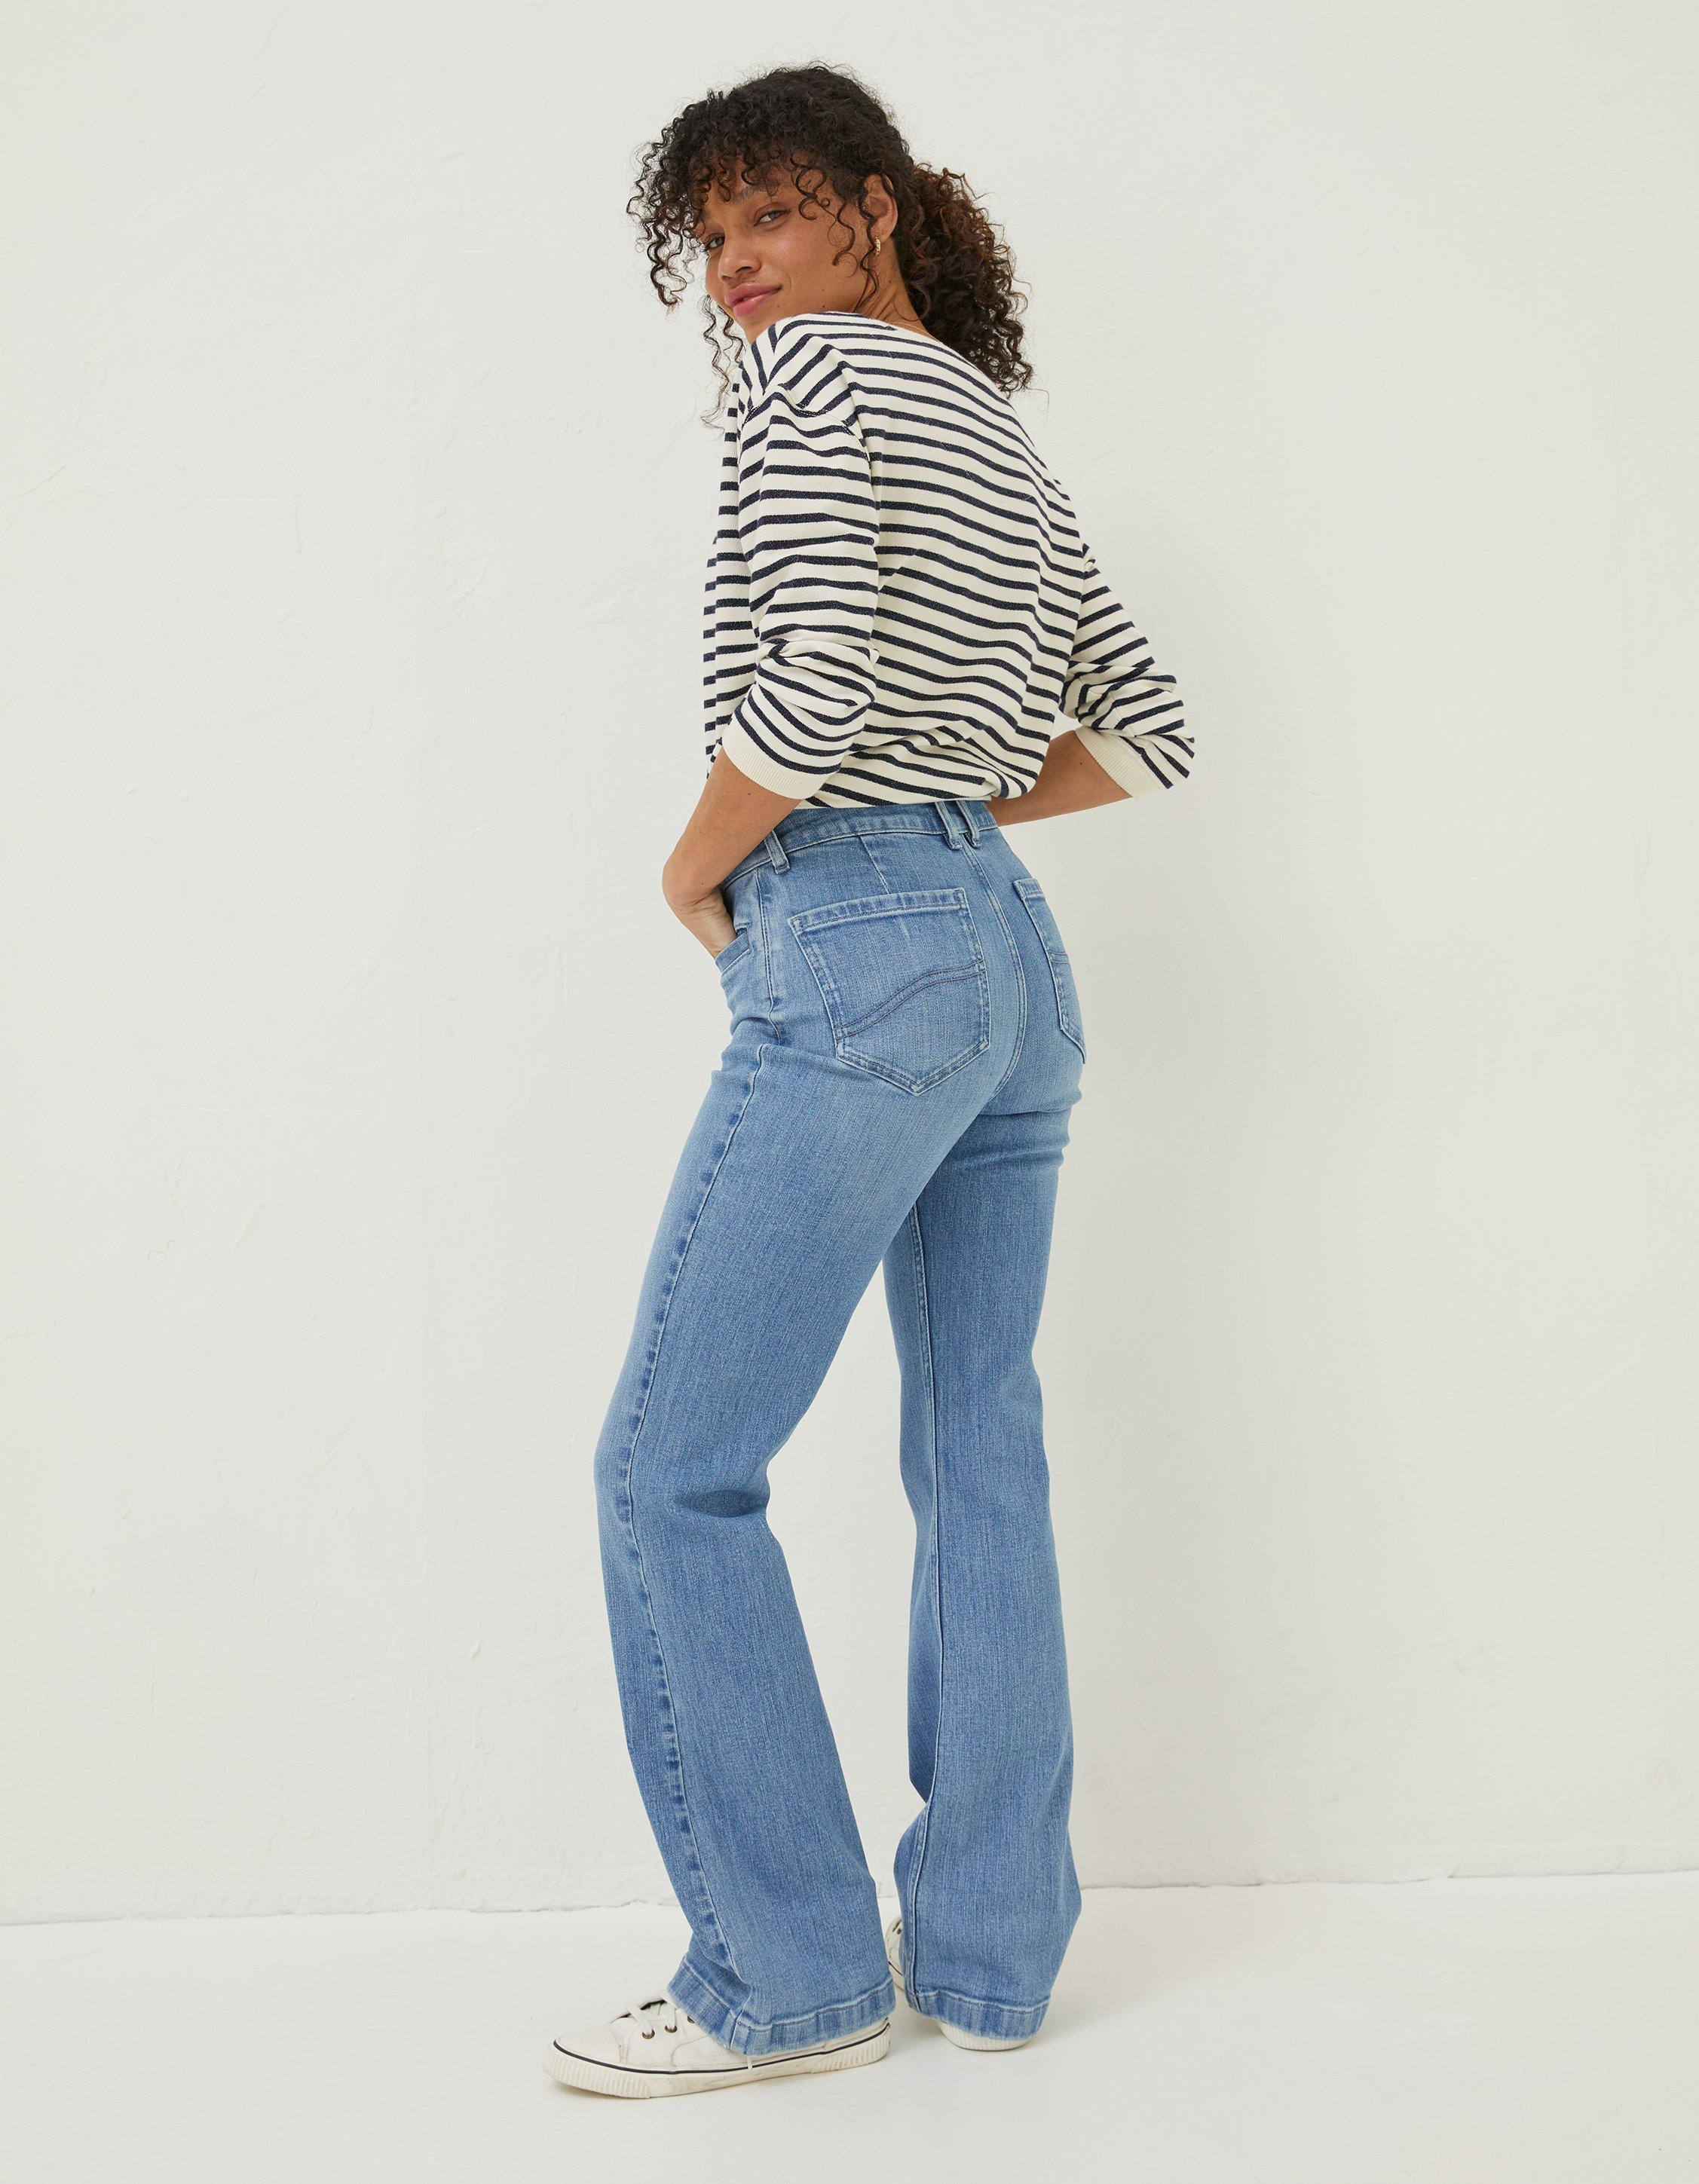 Fly Flare Comfort Stretch Jeans, Jeans & Dungarees